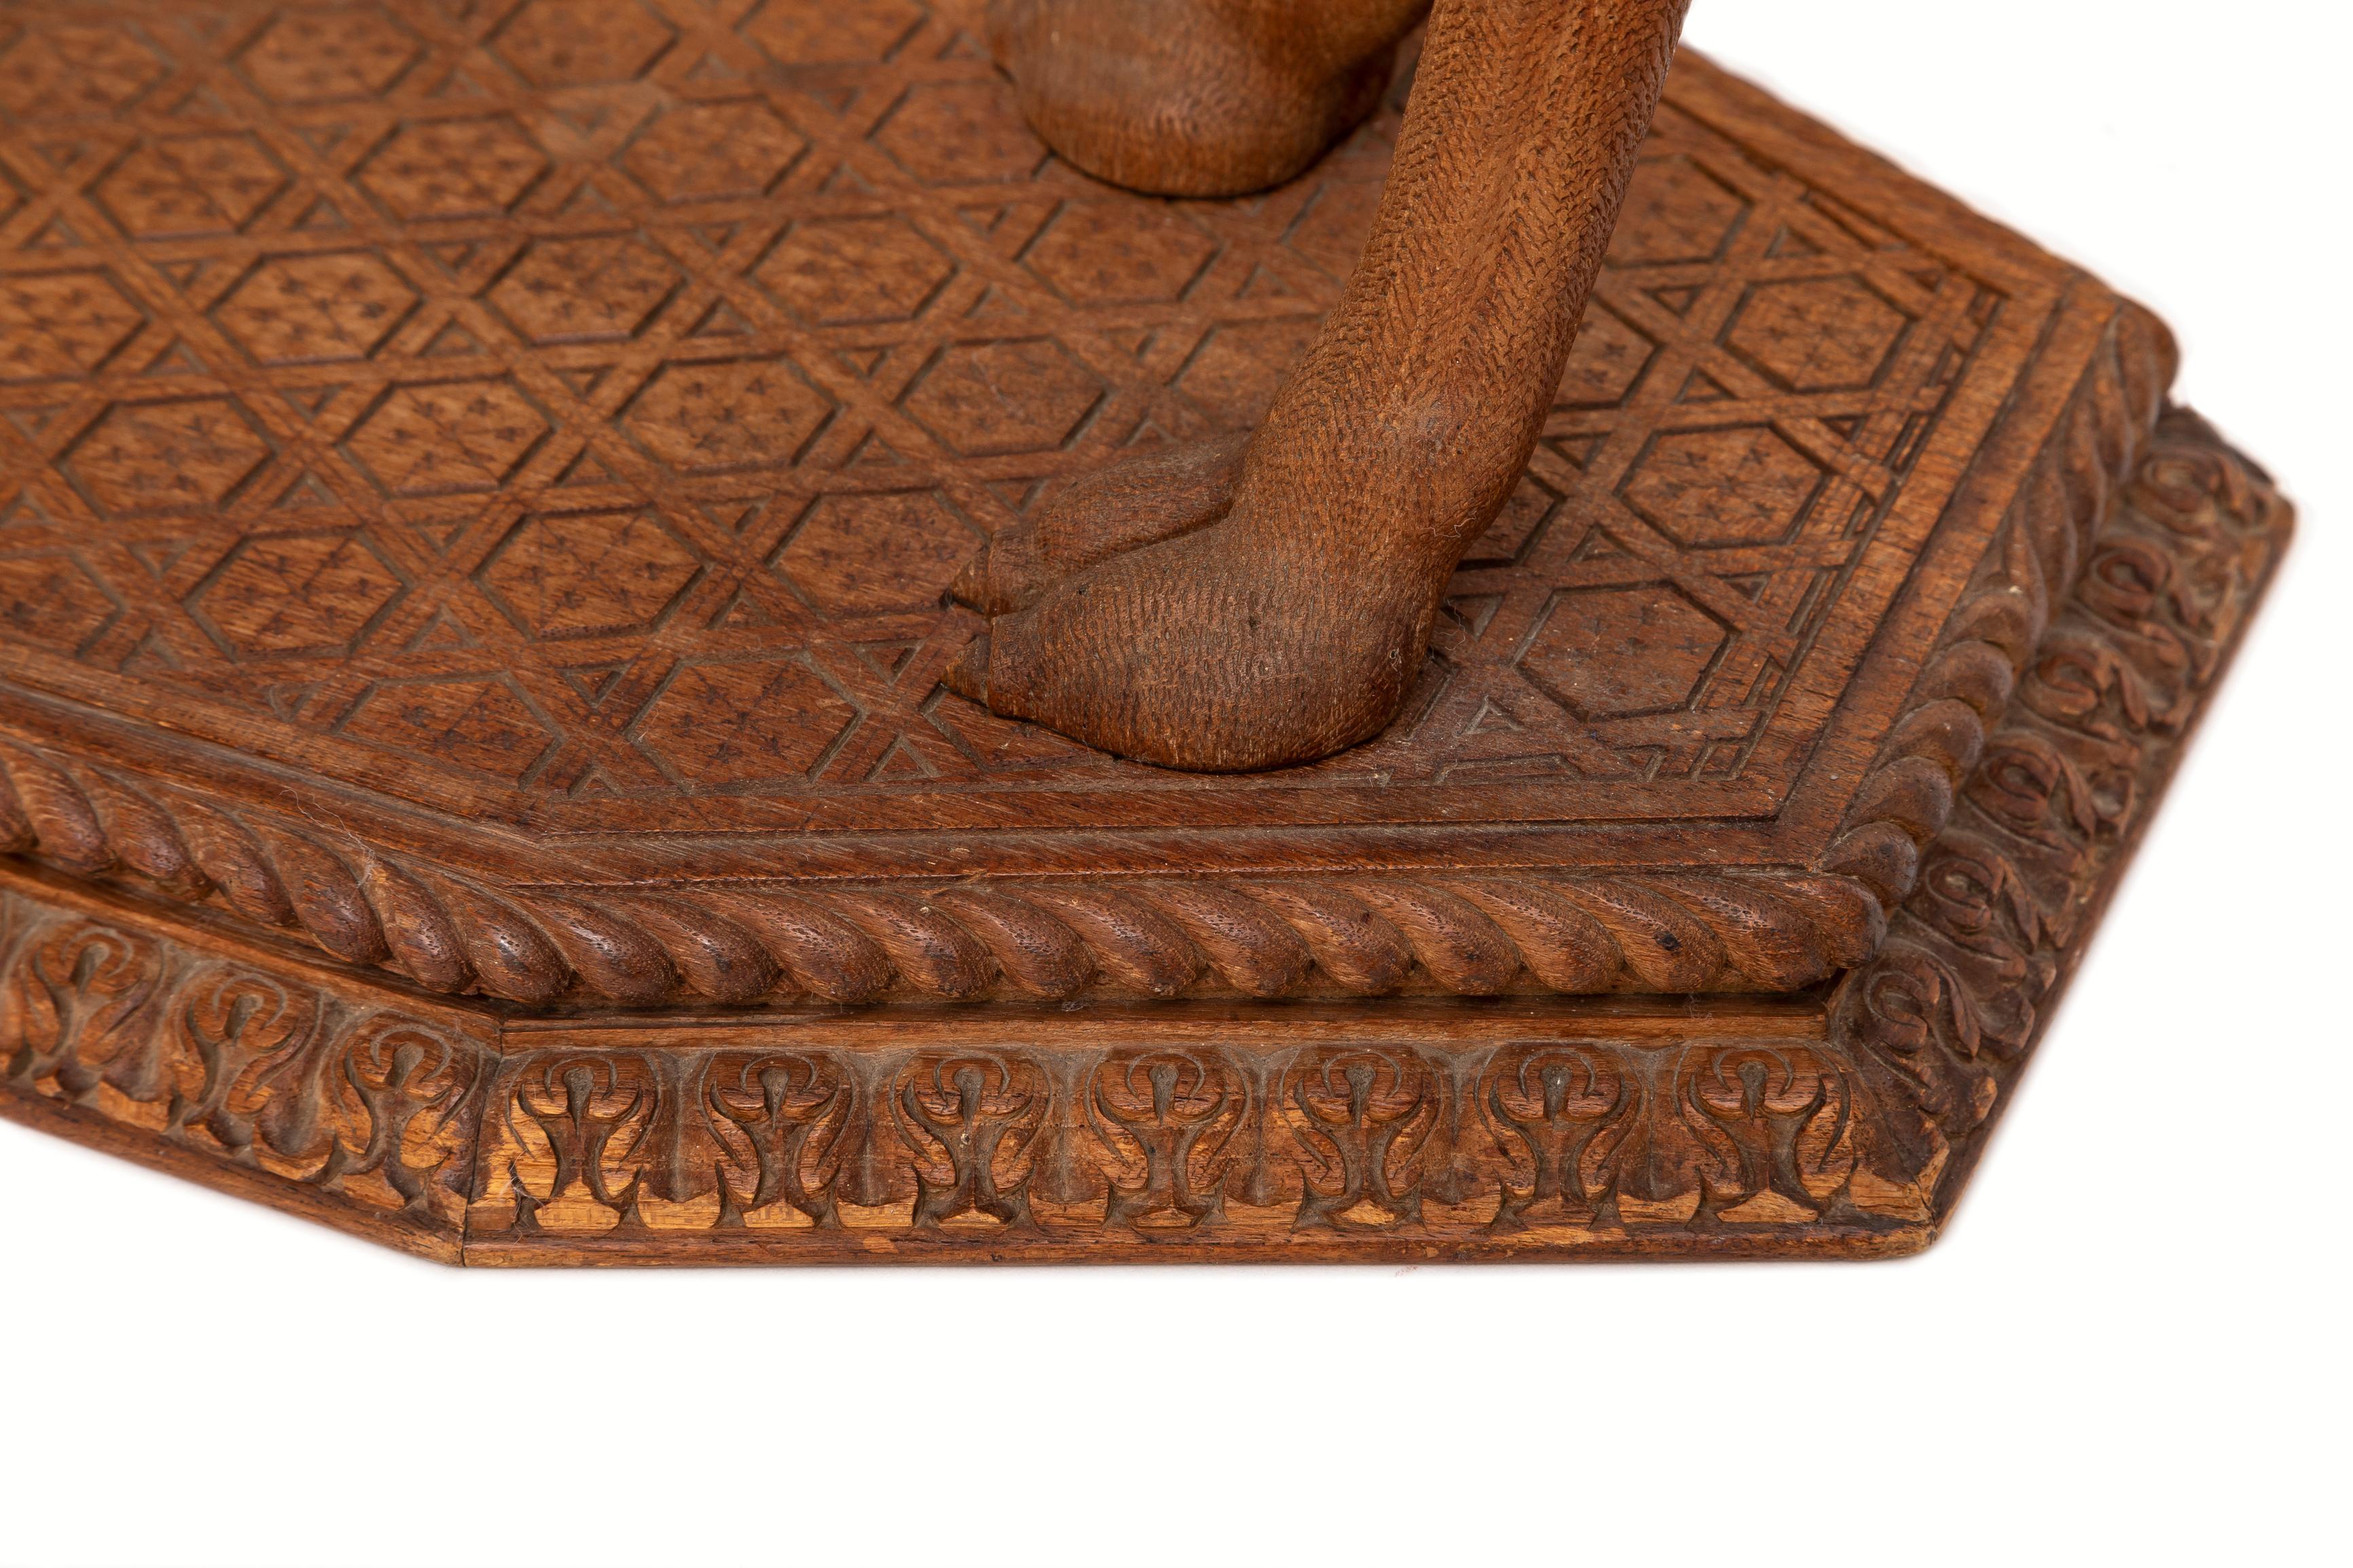 French Orientalist Hand-Carved Camel Form Table w/ Square Gilt Bronze Top For Sale 6